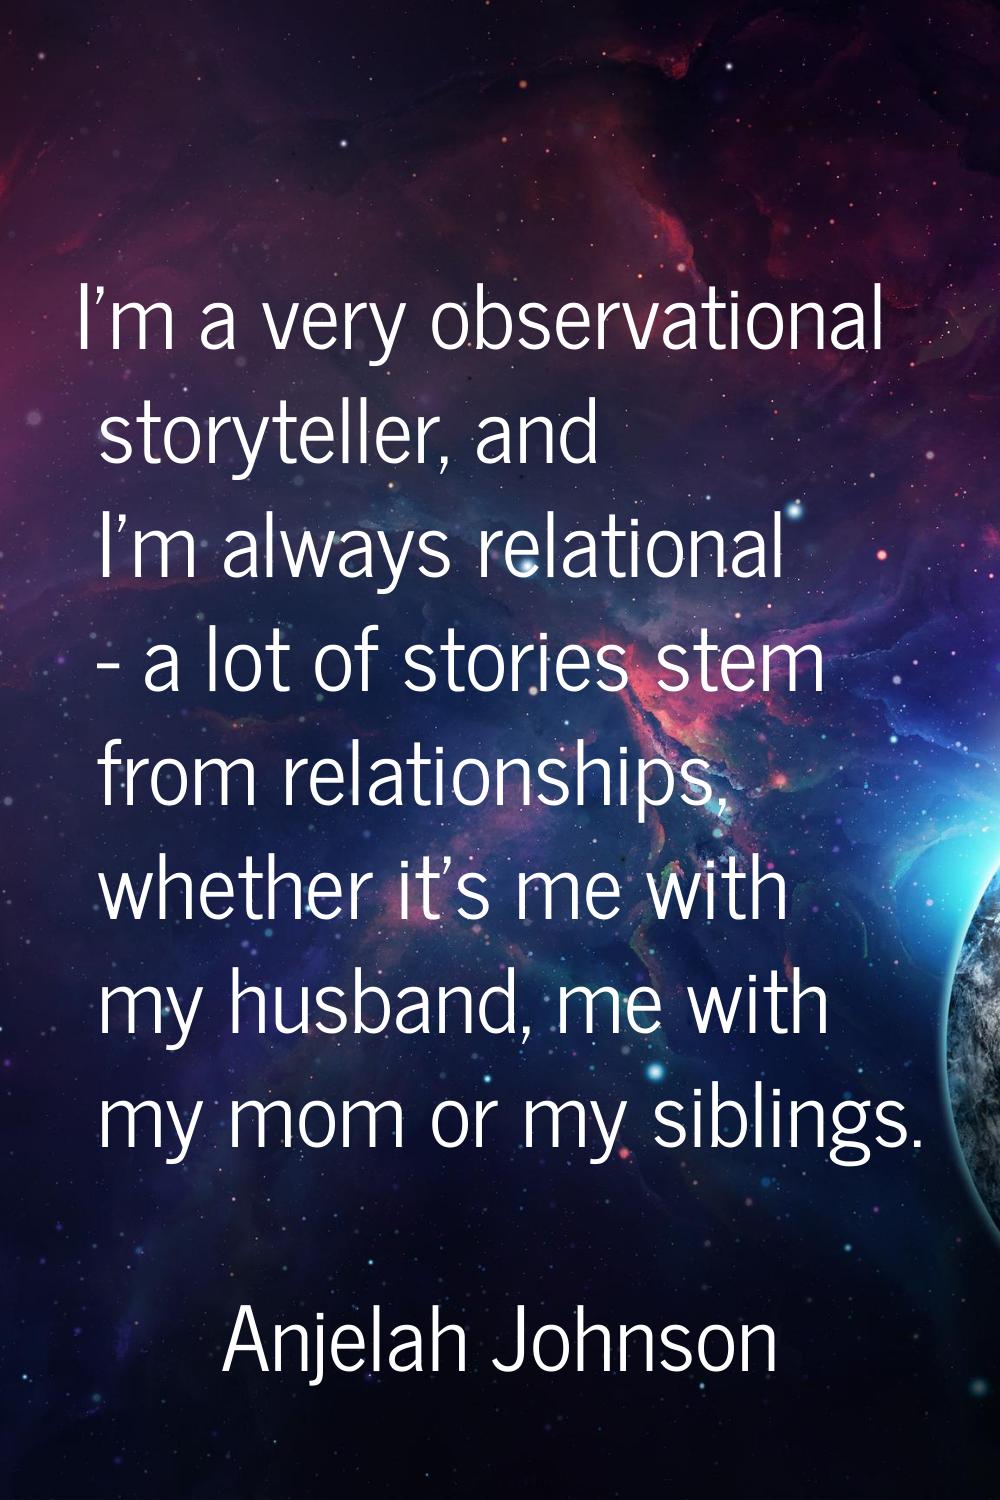 I'm a very observational storyteller, and I'm always relational - a lot of stories stem from relati